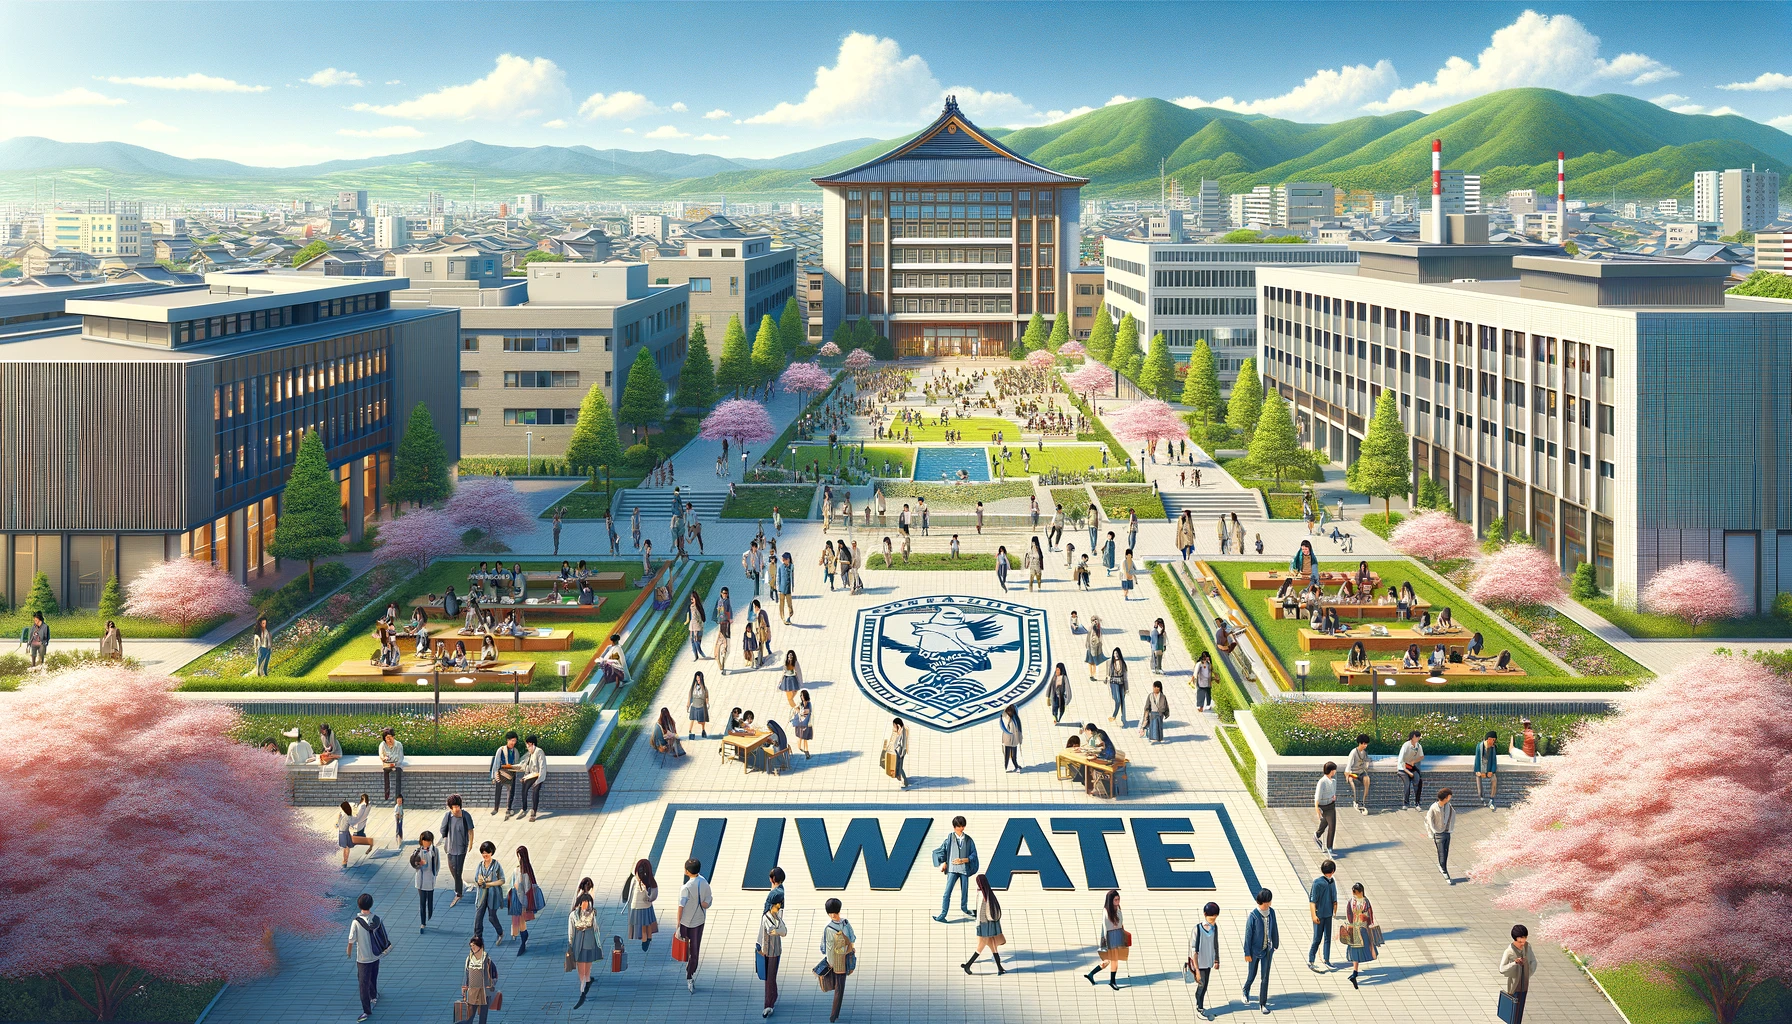 A vibrant campus scene at Iwate University in Japan, showing a bustling university environment with students of diverse backgrounds. The image includes modern and traditional architecture blending seamlessly, depicting the university's emblem prominently. Students are engaged in various activities such as studying outdoors, socializing, and participating in club activities. The landscape is lush and green, with cherry blossoms visible, suggesting springtime. The word 'IWATE' is included in bold English letters in the foreground. The scene is set during a clear, sunny day, emphasizing the university's appeal and popularity.